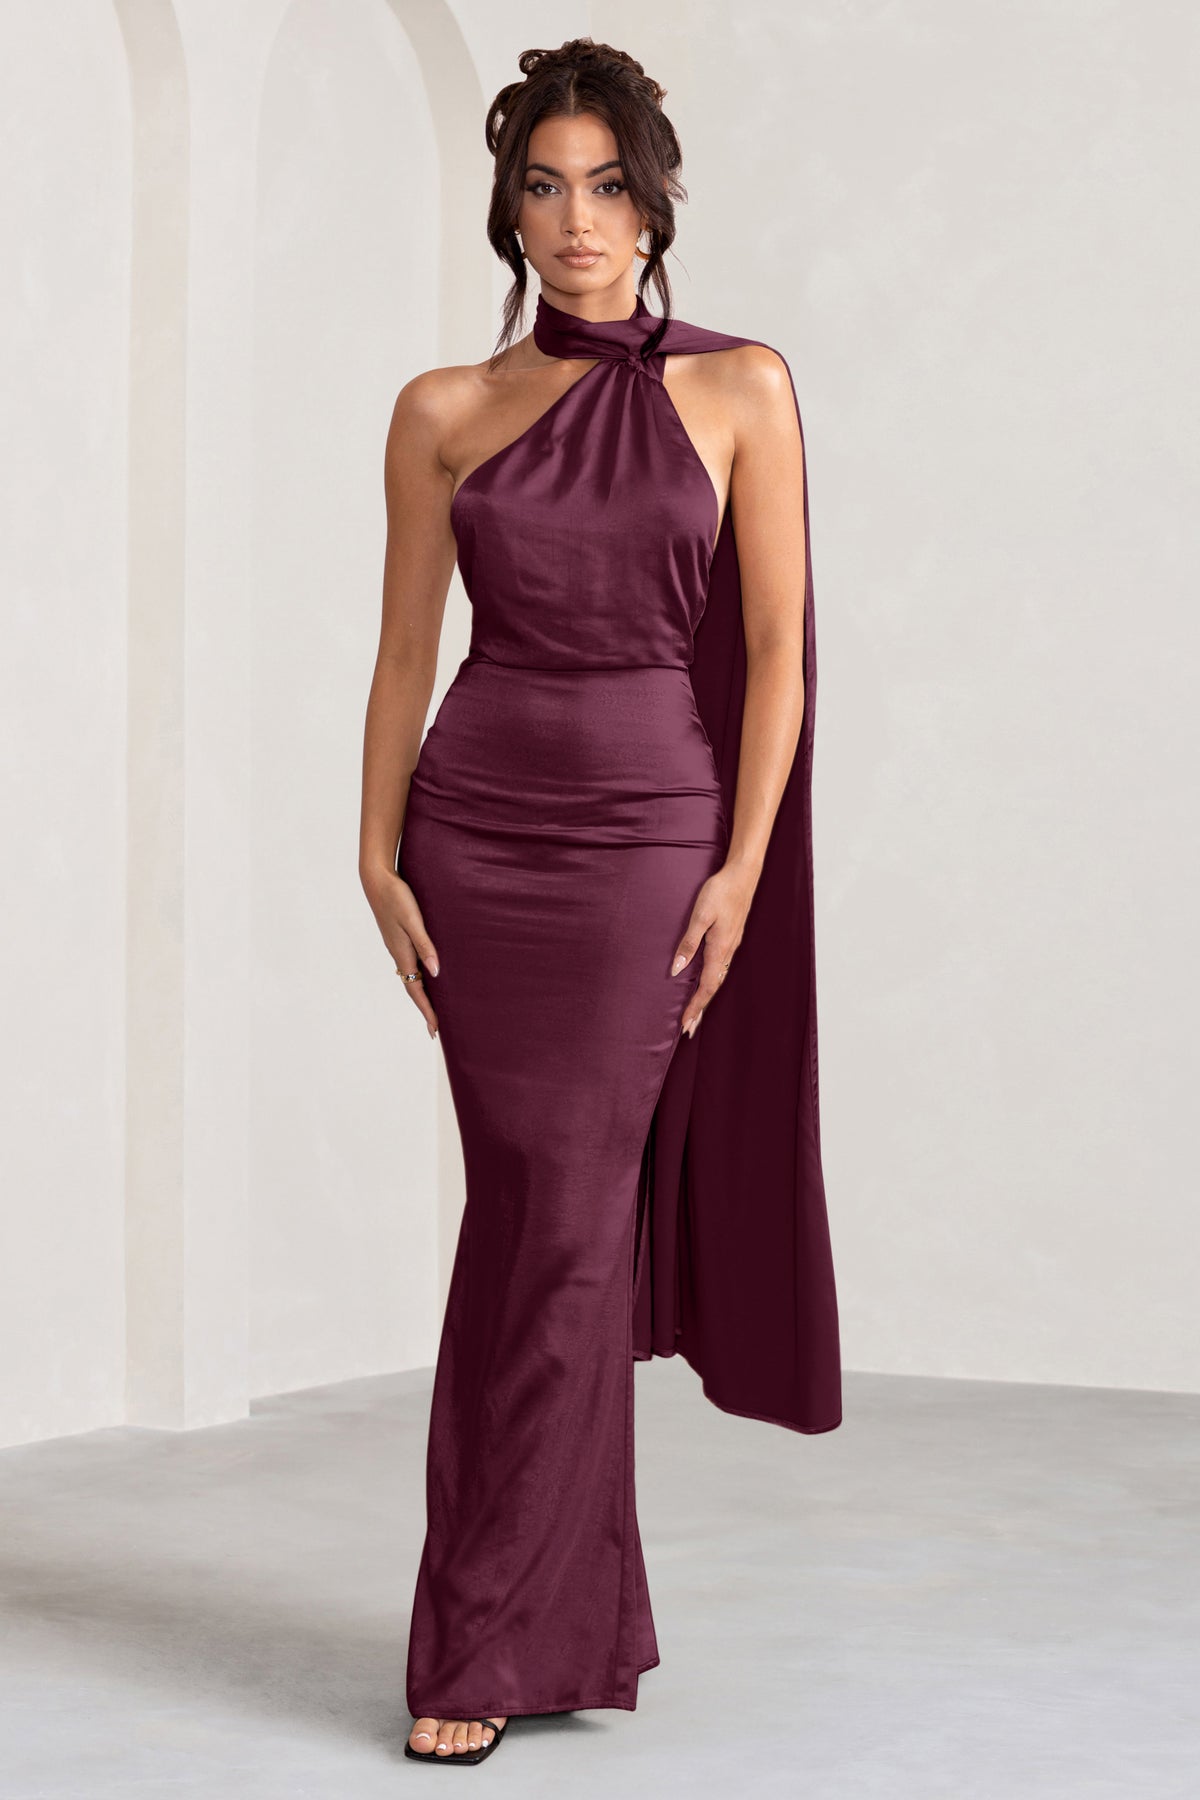 Buy PURPLE SATIN BACKLESS MAXI DRESS for Women Online in India